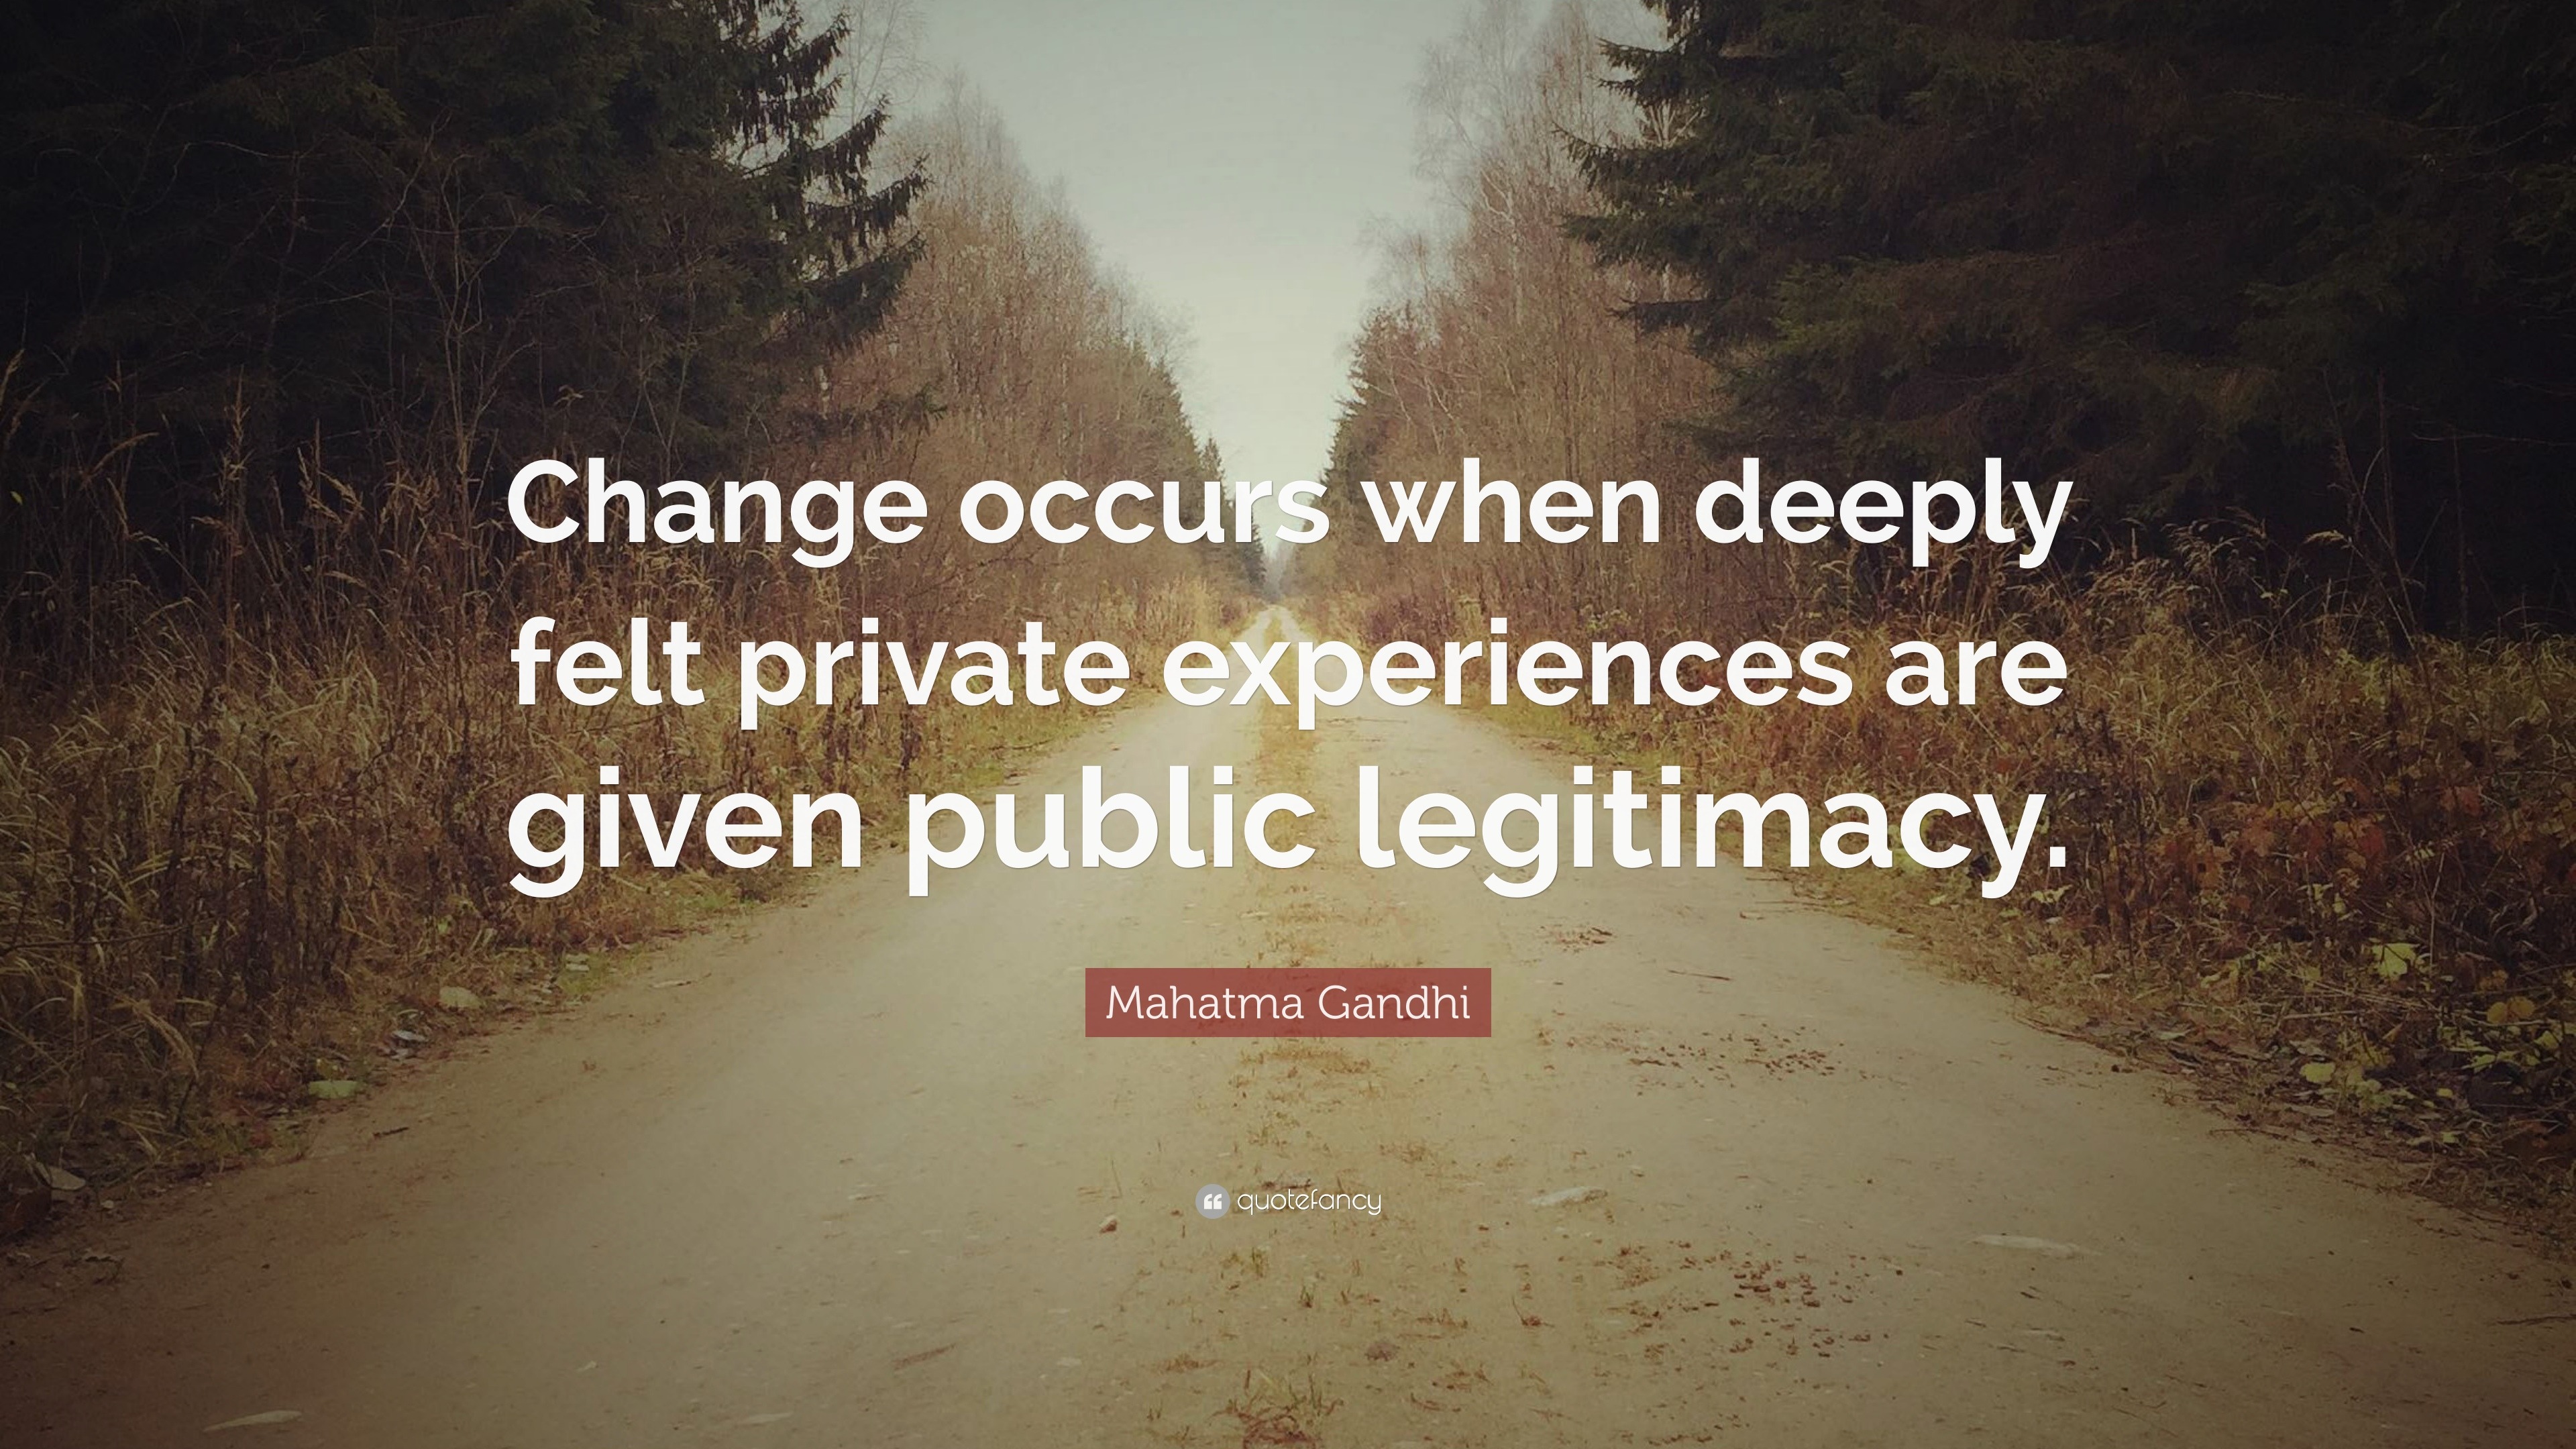 Mahatma Gandhi Quote: “Change occurs when deeply felt private ...